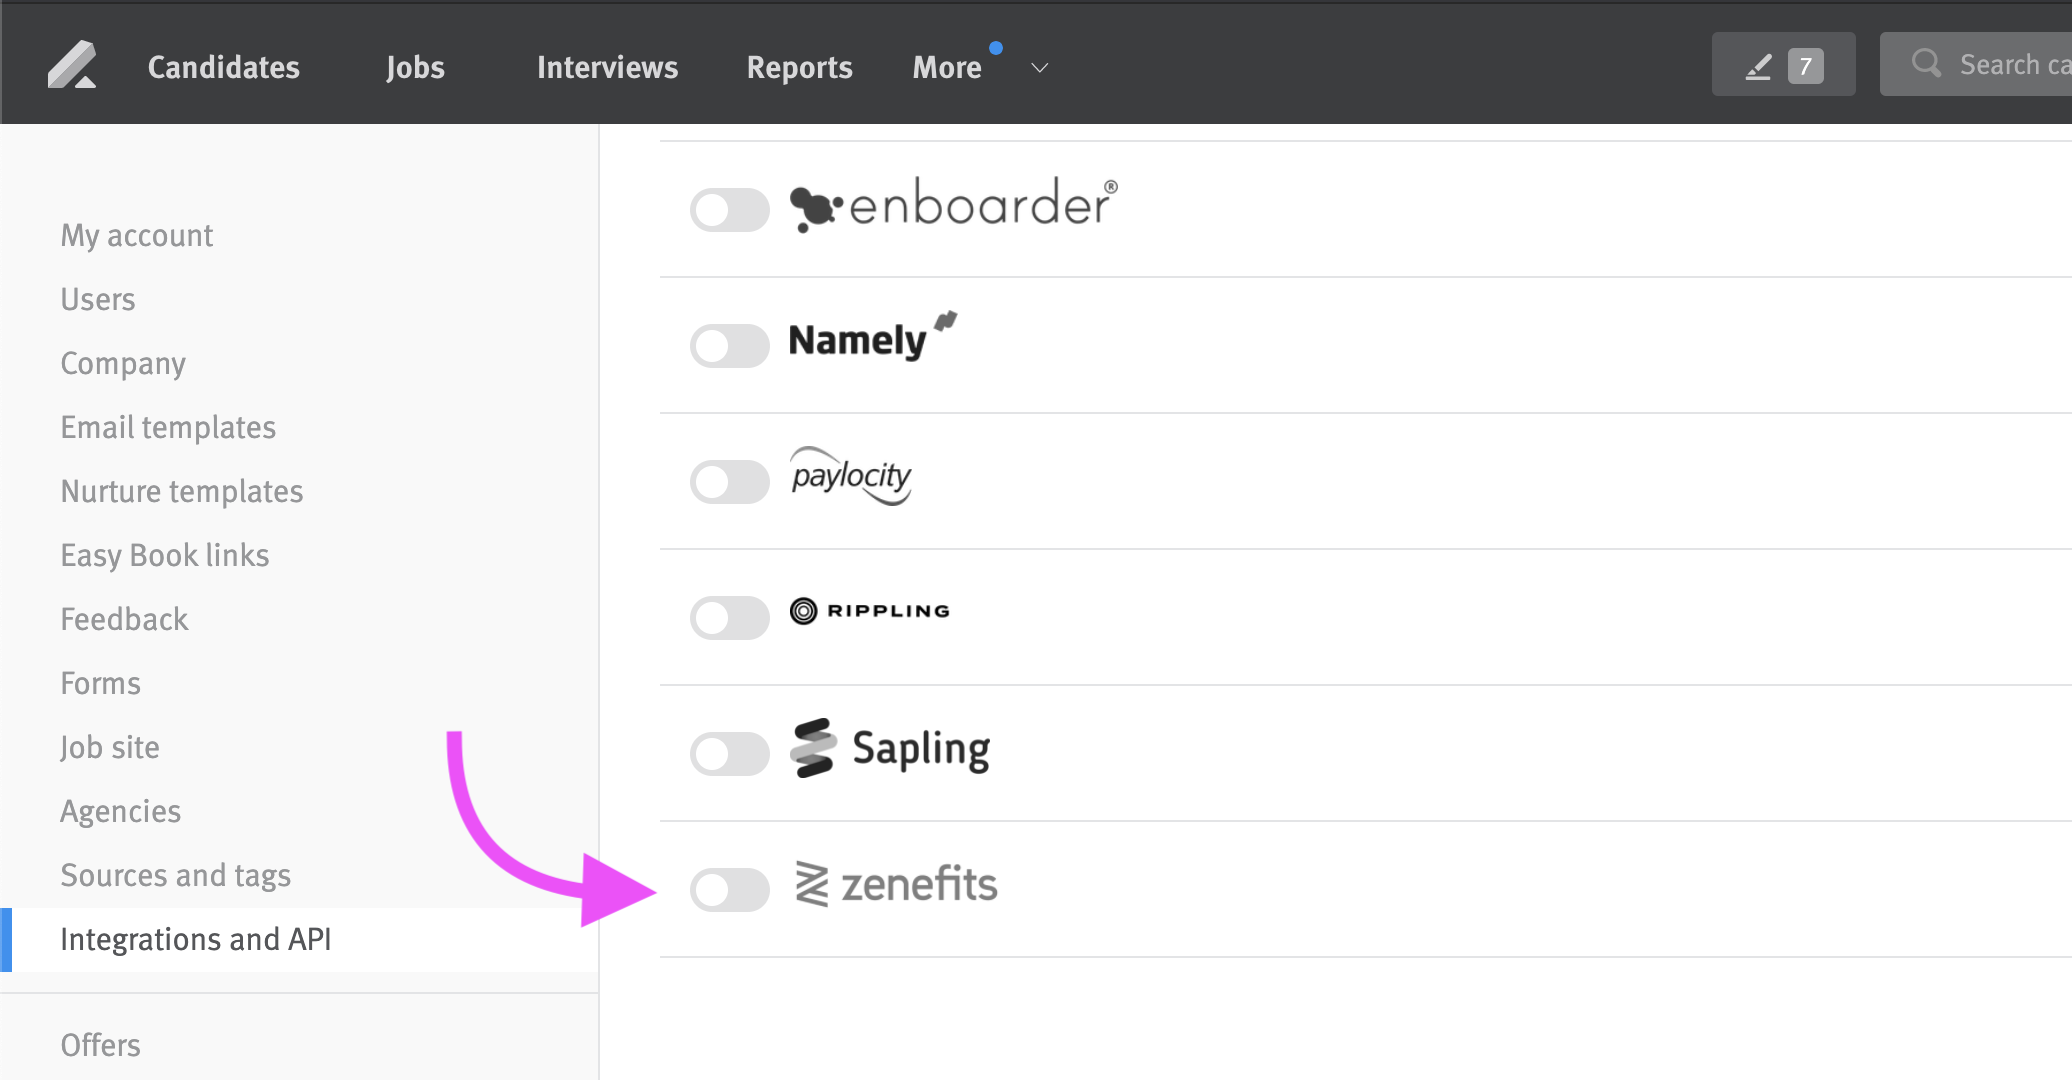 Lever integrations and API page with arrow pointing to zenefits in list